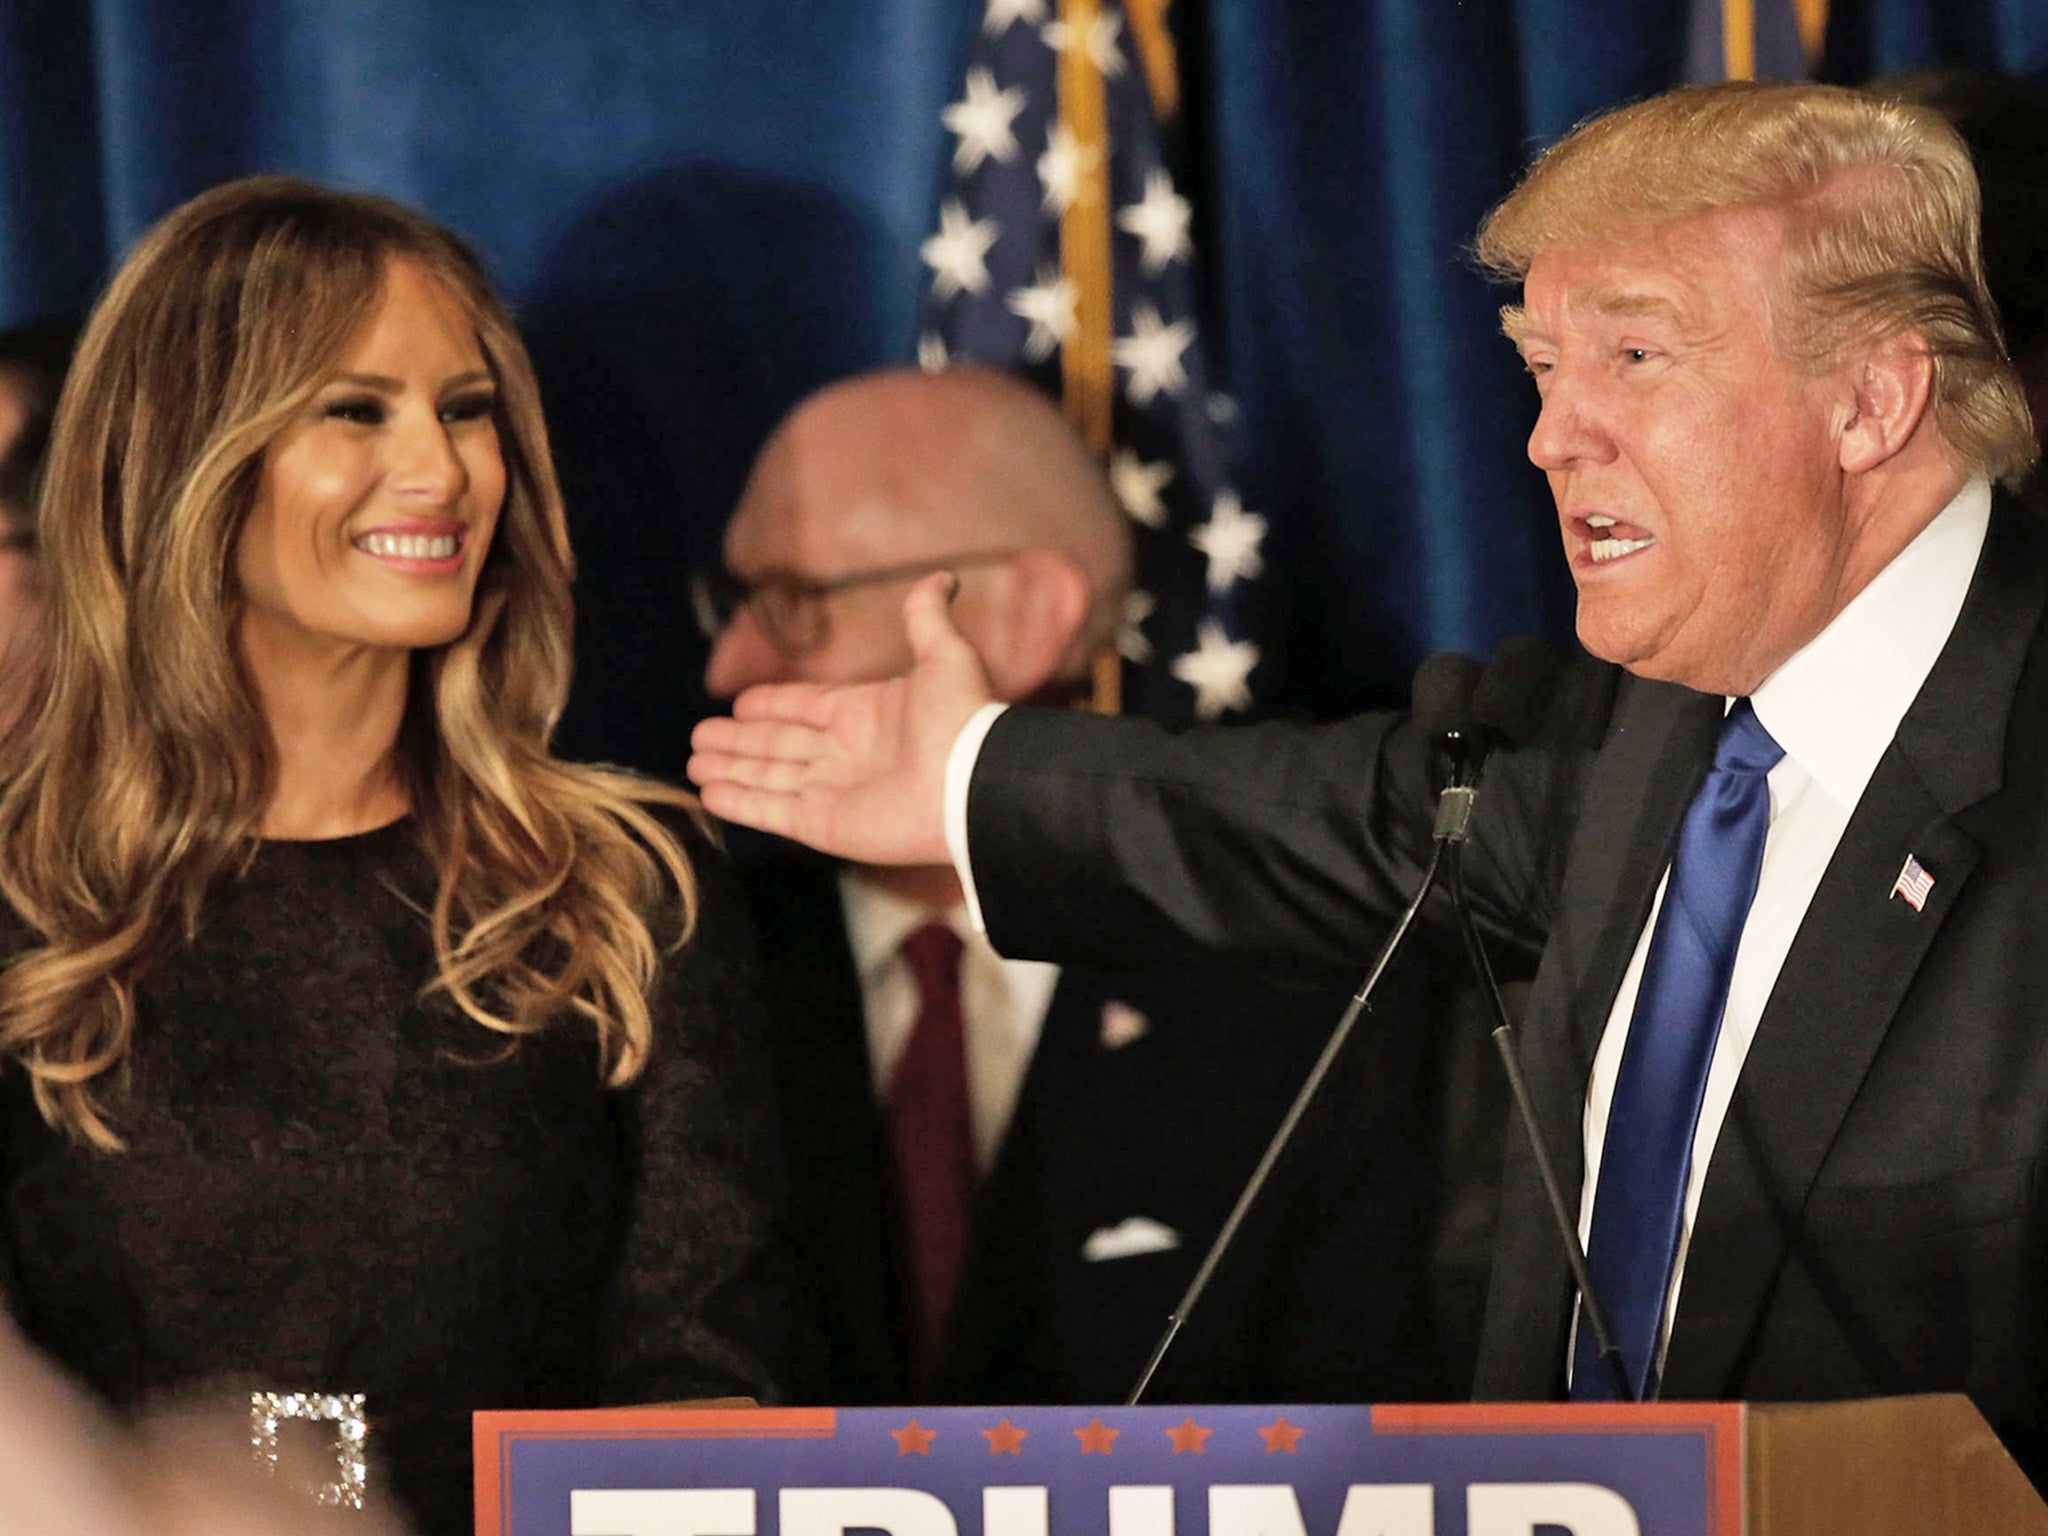 Donald Trump has failed to keep his wife Melania out of the picture